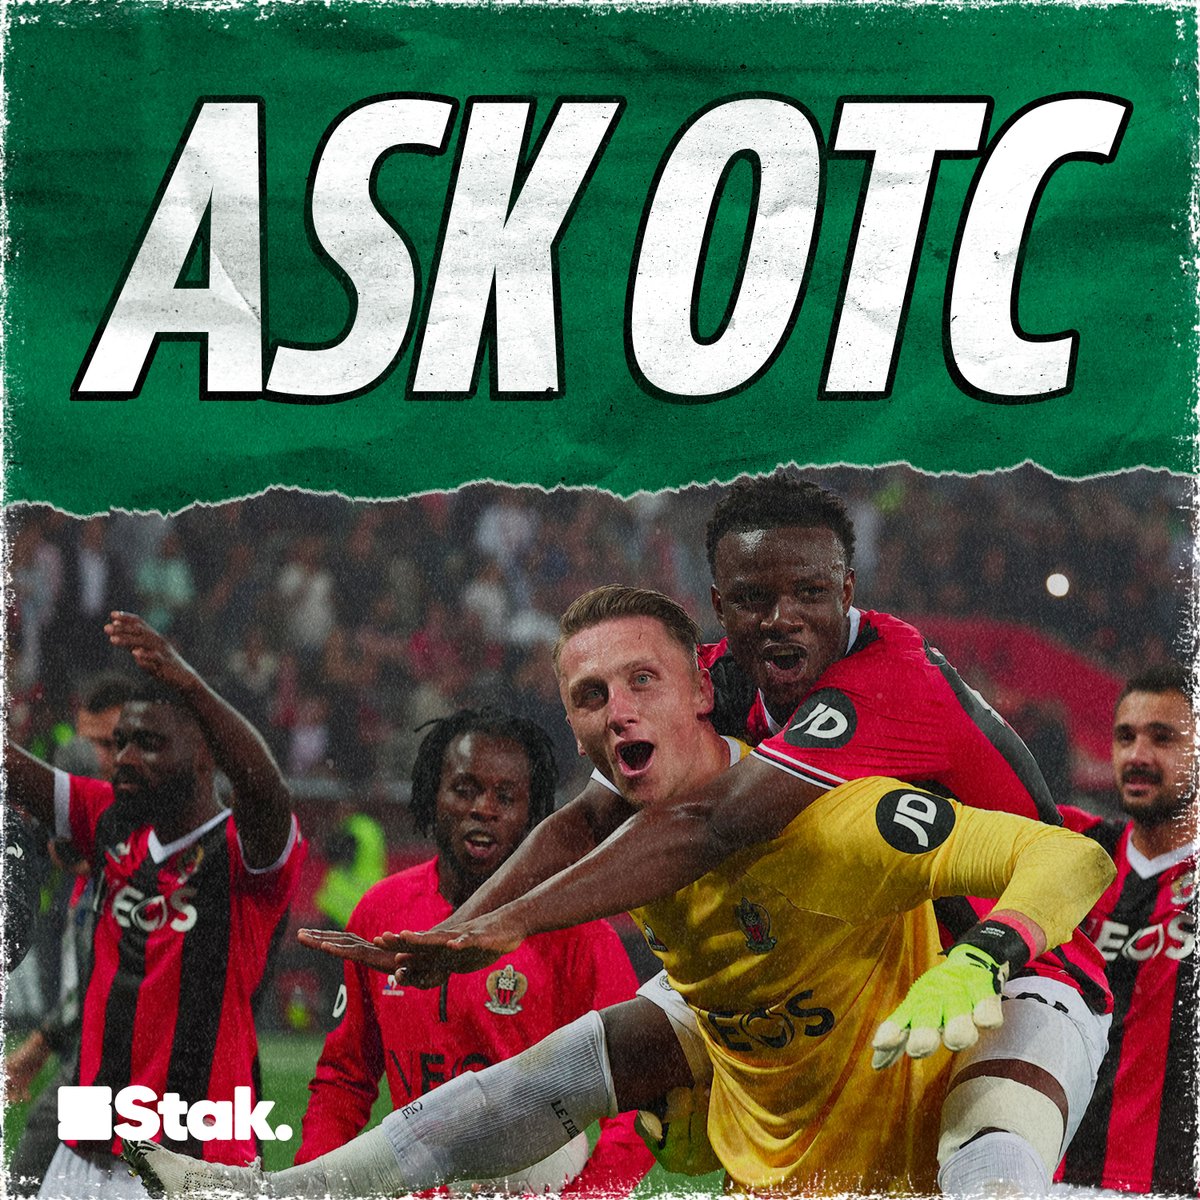 😎 @radiodotun is back on the pod! He'll be joined by @andybrassell and @NickyBandini on this week's Ask OTC 🗣️ Send us your questions below 👇